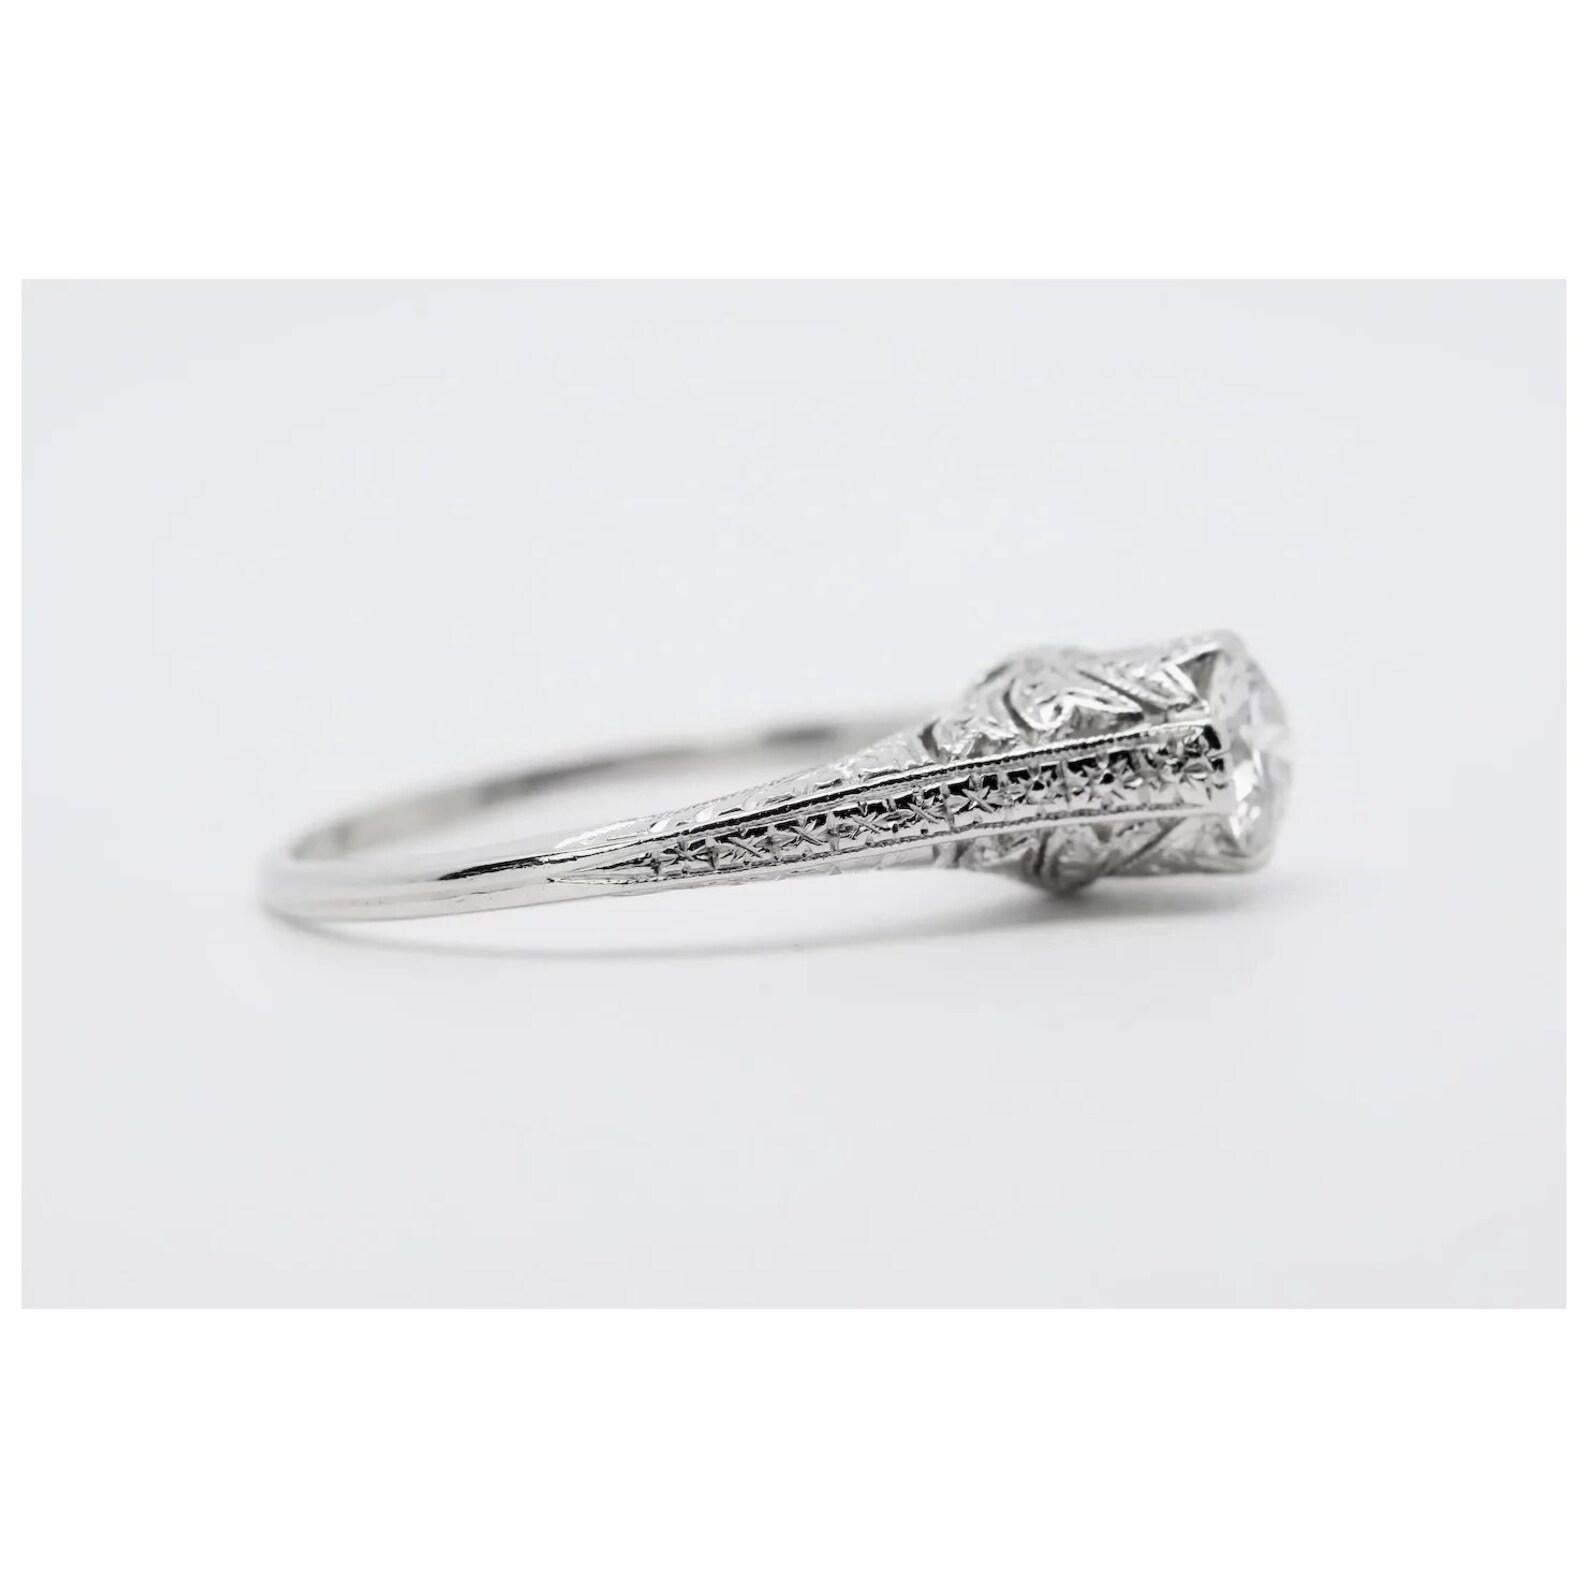 A beautiful hand engraved Art Deco period diamond engagement ring in platinum. In exceptional condition, this original 1920's piece is centered by a sparkling 0.60 carat G color, VS1 clarity antique European cut diamond. The hand crafted mounting